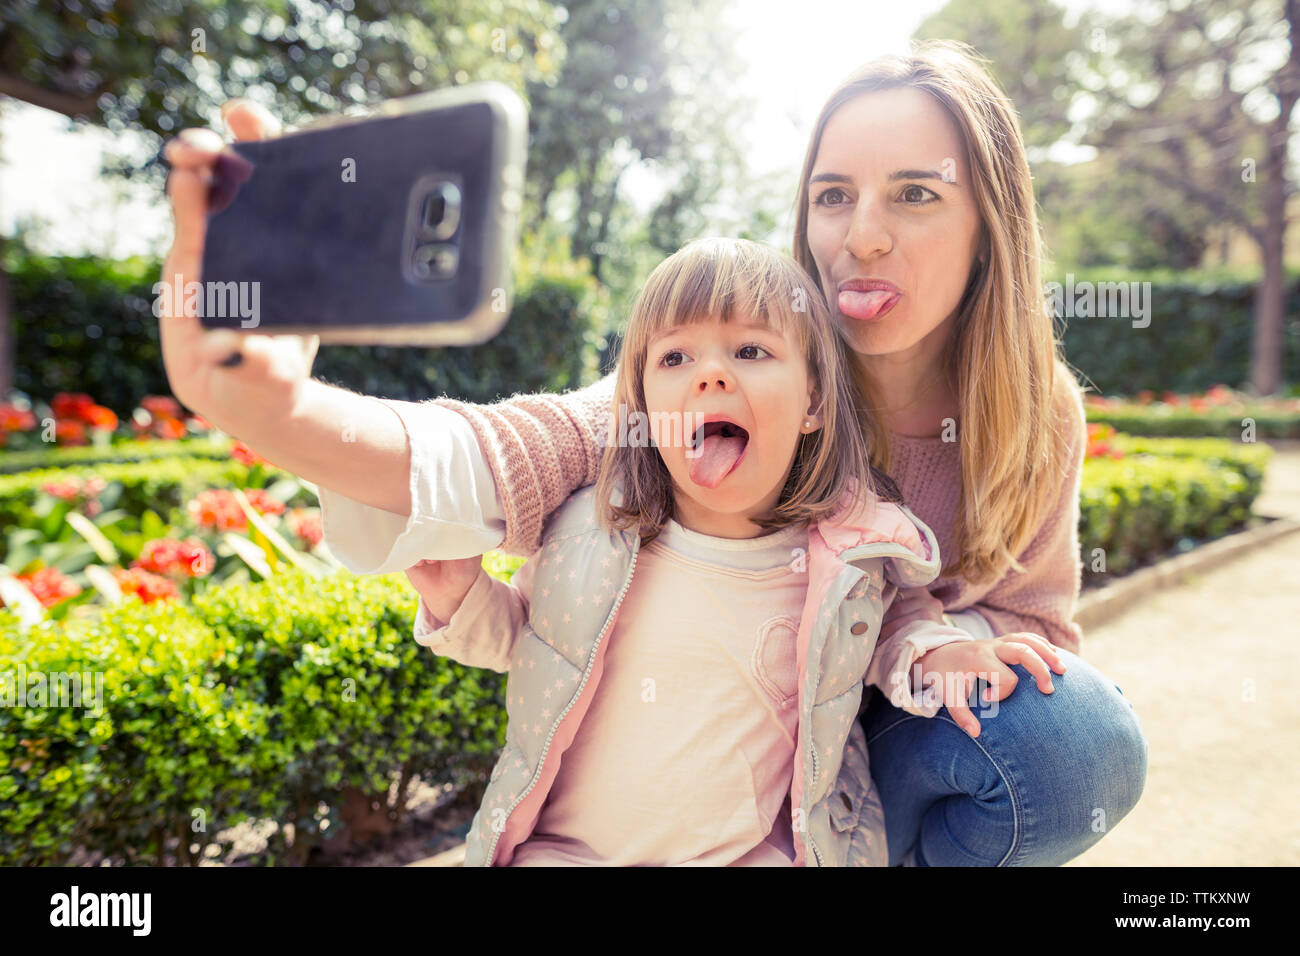 Mother and daughter sticking out tongue while taking selfie in park Stock Photo